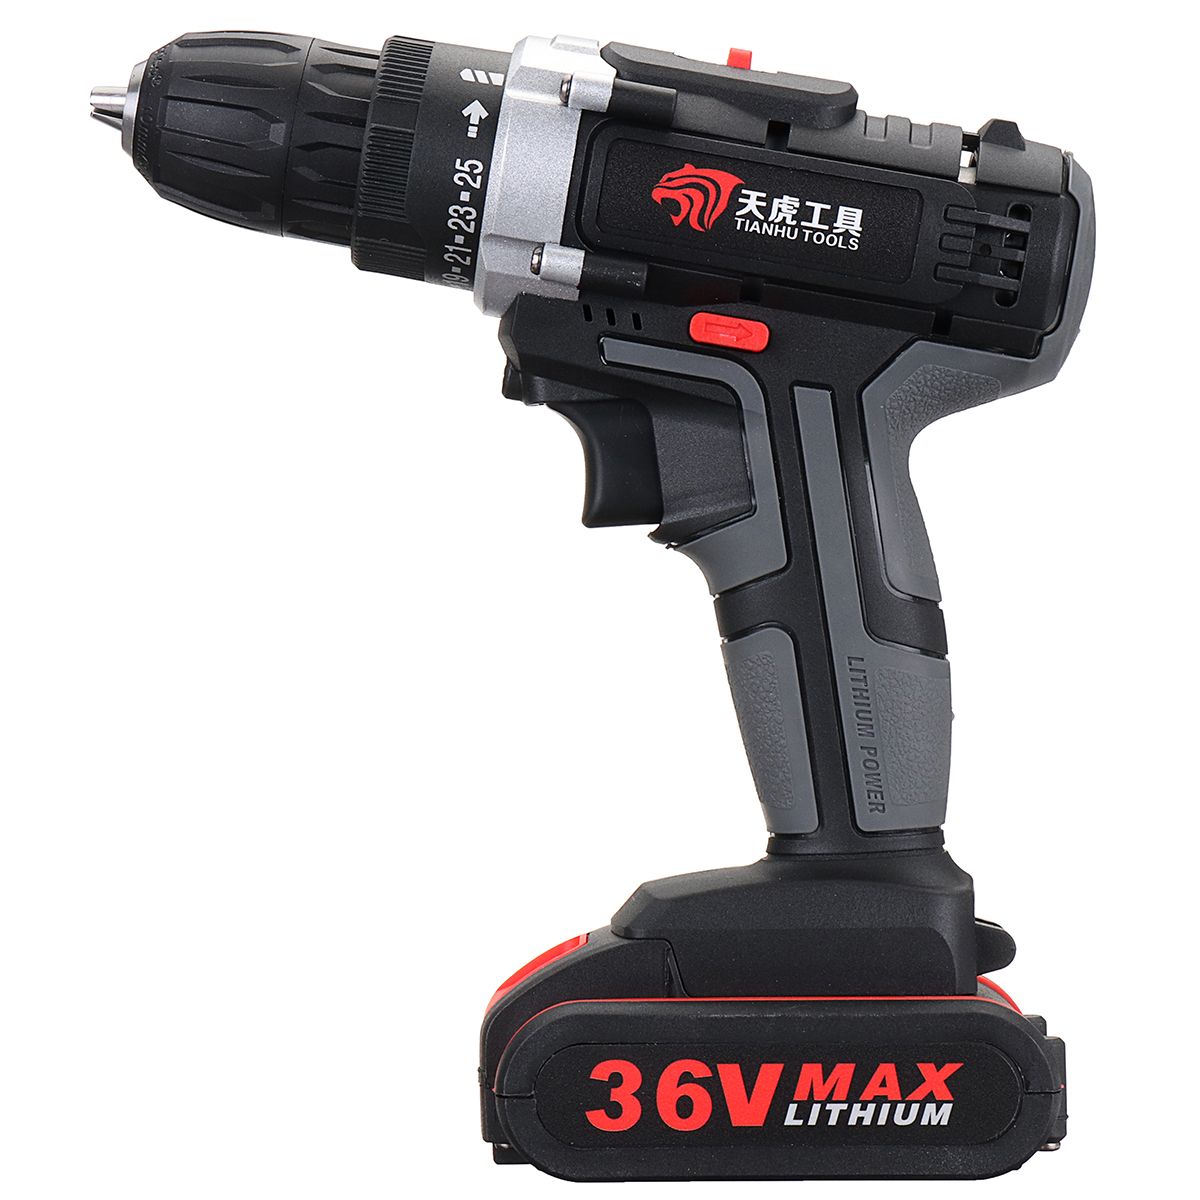 36V-Dual-used-Drill-2-Speed-Electric-Drill-Charging-Drill-Lithium-Power-Drill-Household-Hand-Drill-1537843